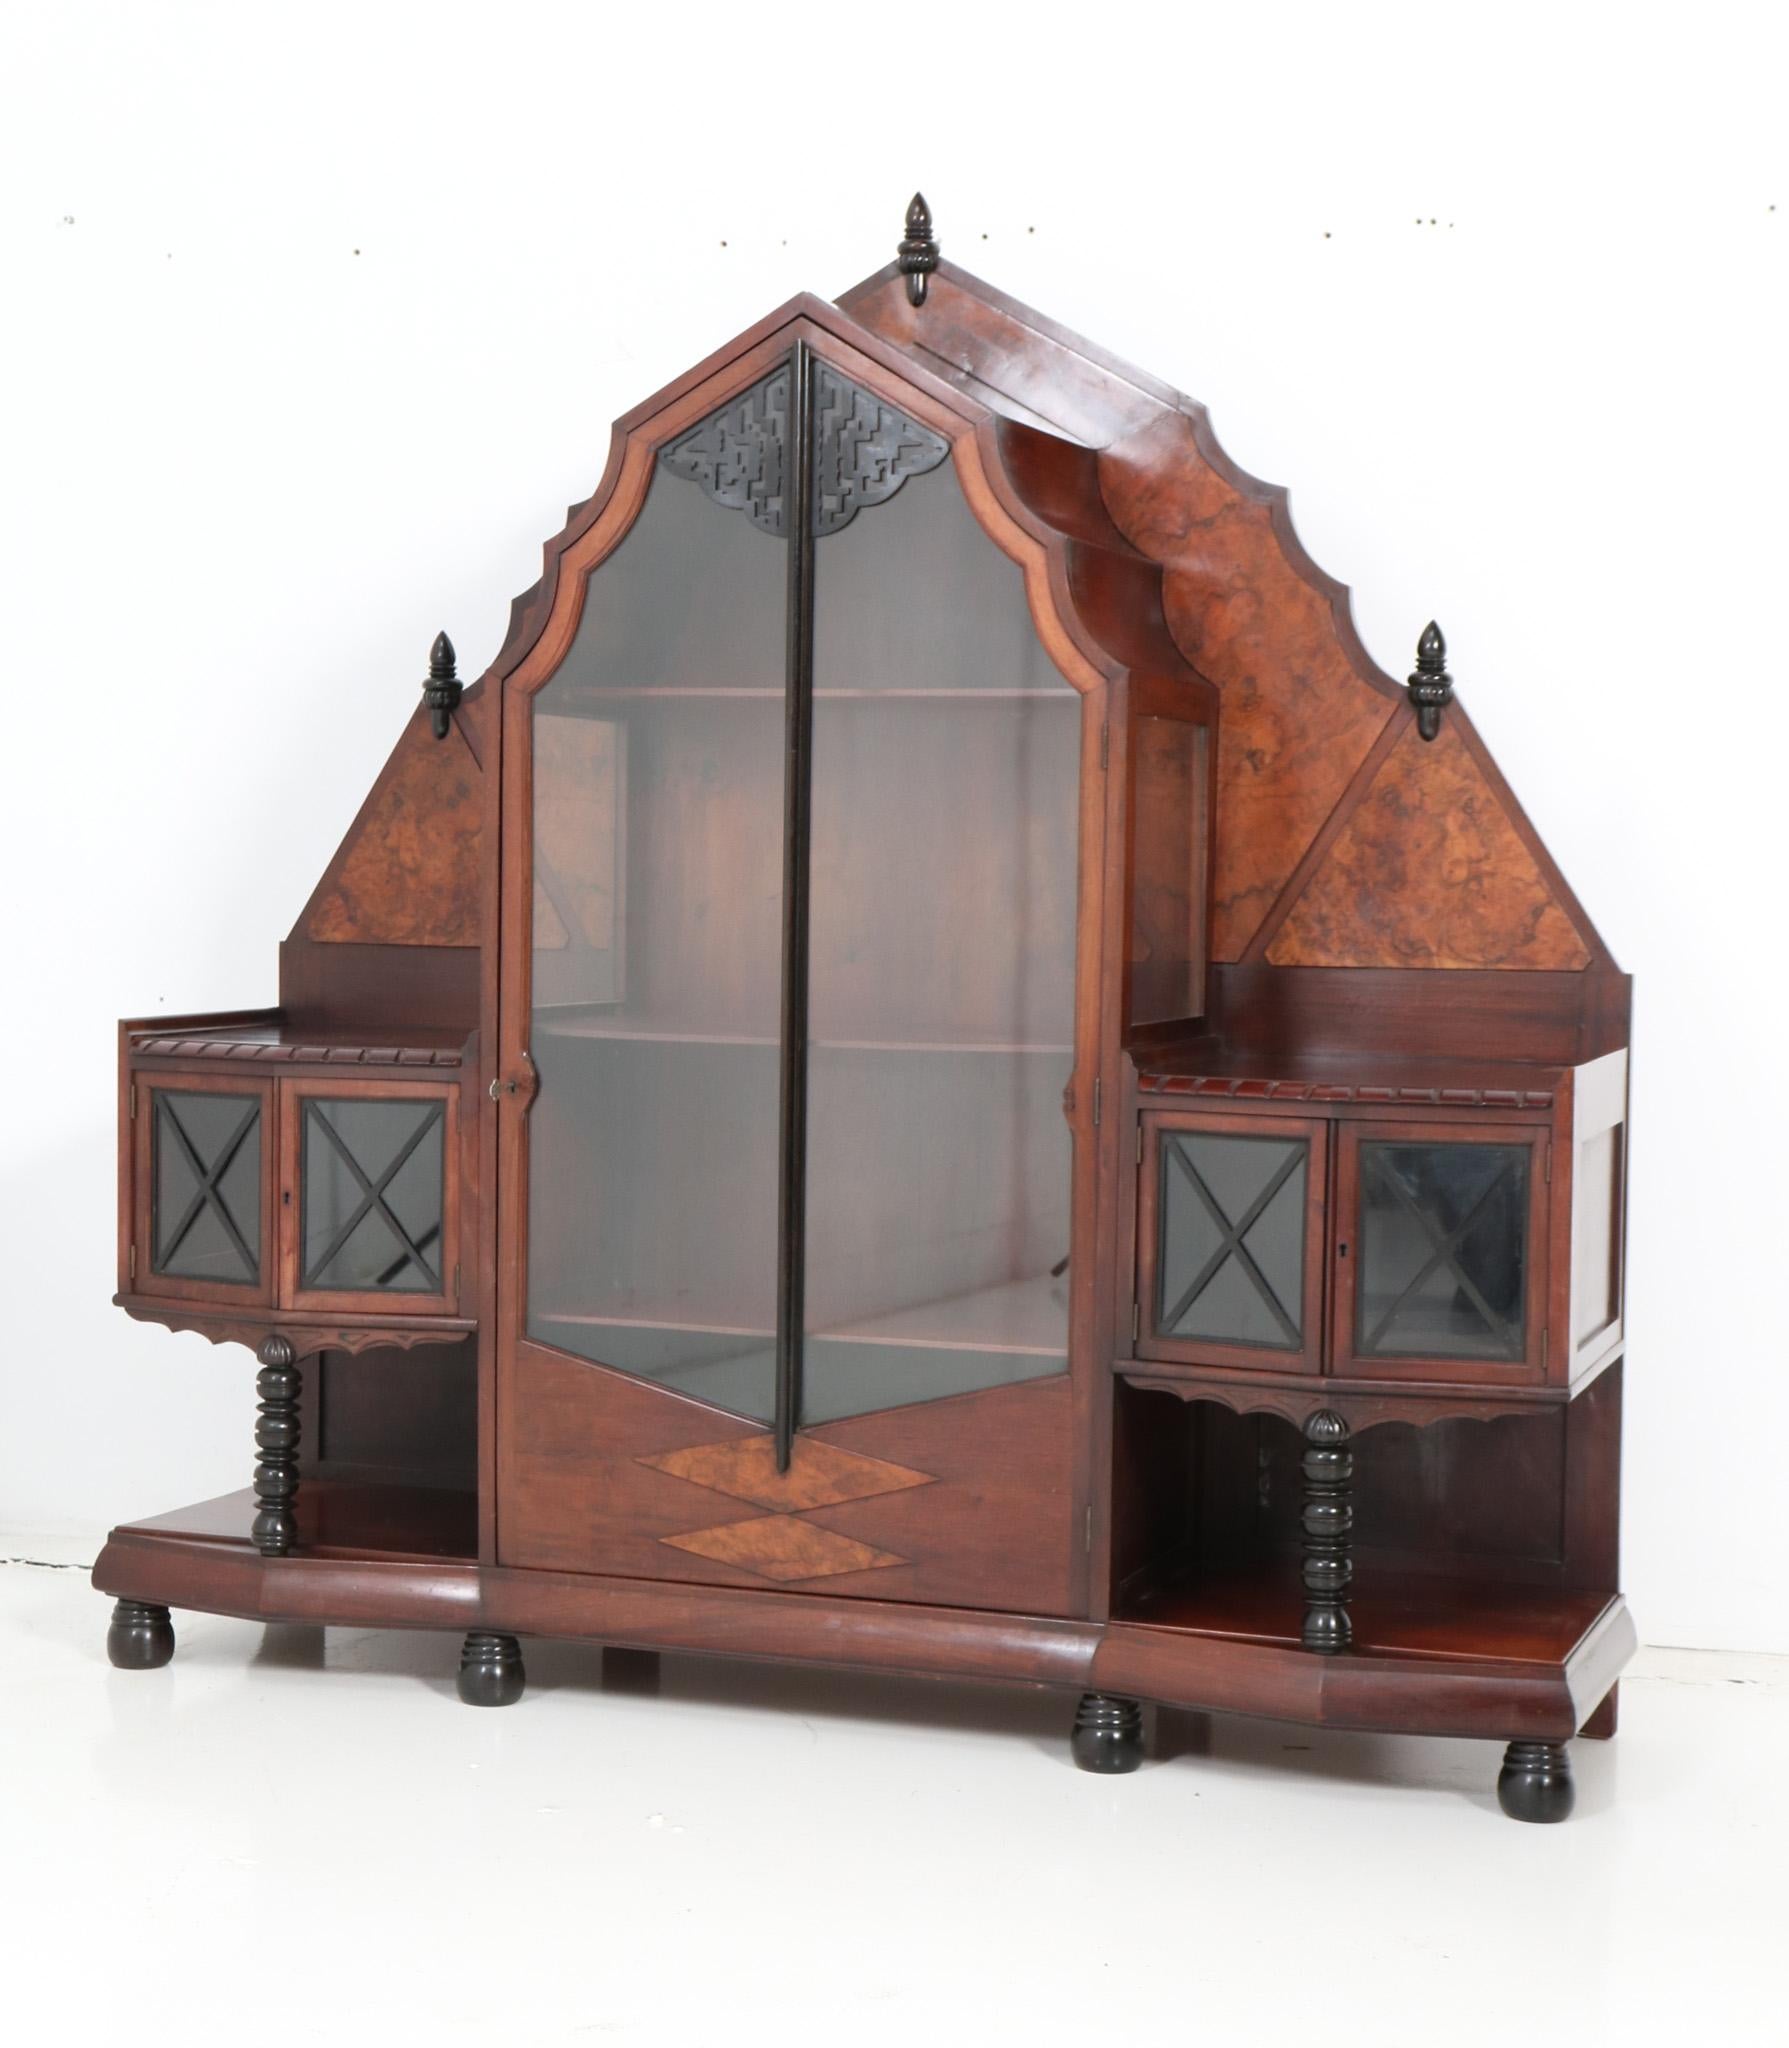 Magnificent and ultra rare Art Deco Amsterdamse School vitrine or China cabinet.
Design by Max Coini Amsterdam.
Striking Dutch design from the 1920s.
Solid walnut base with original burl walnut veneer and original black lacquered elements.
Three